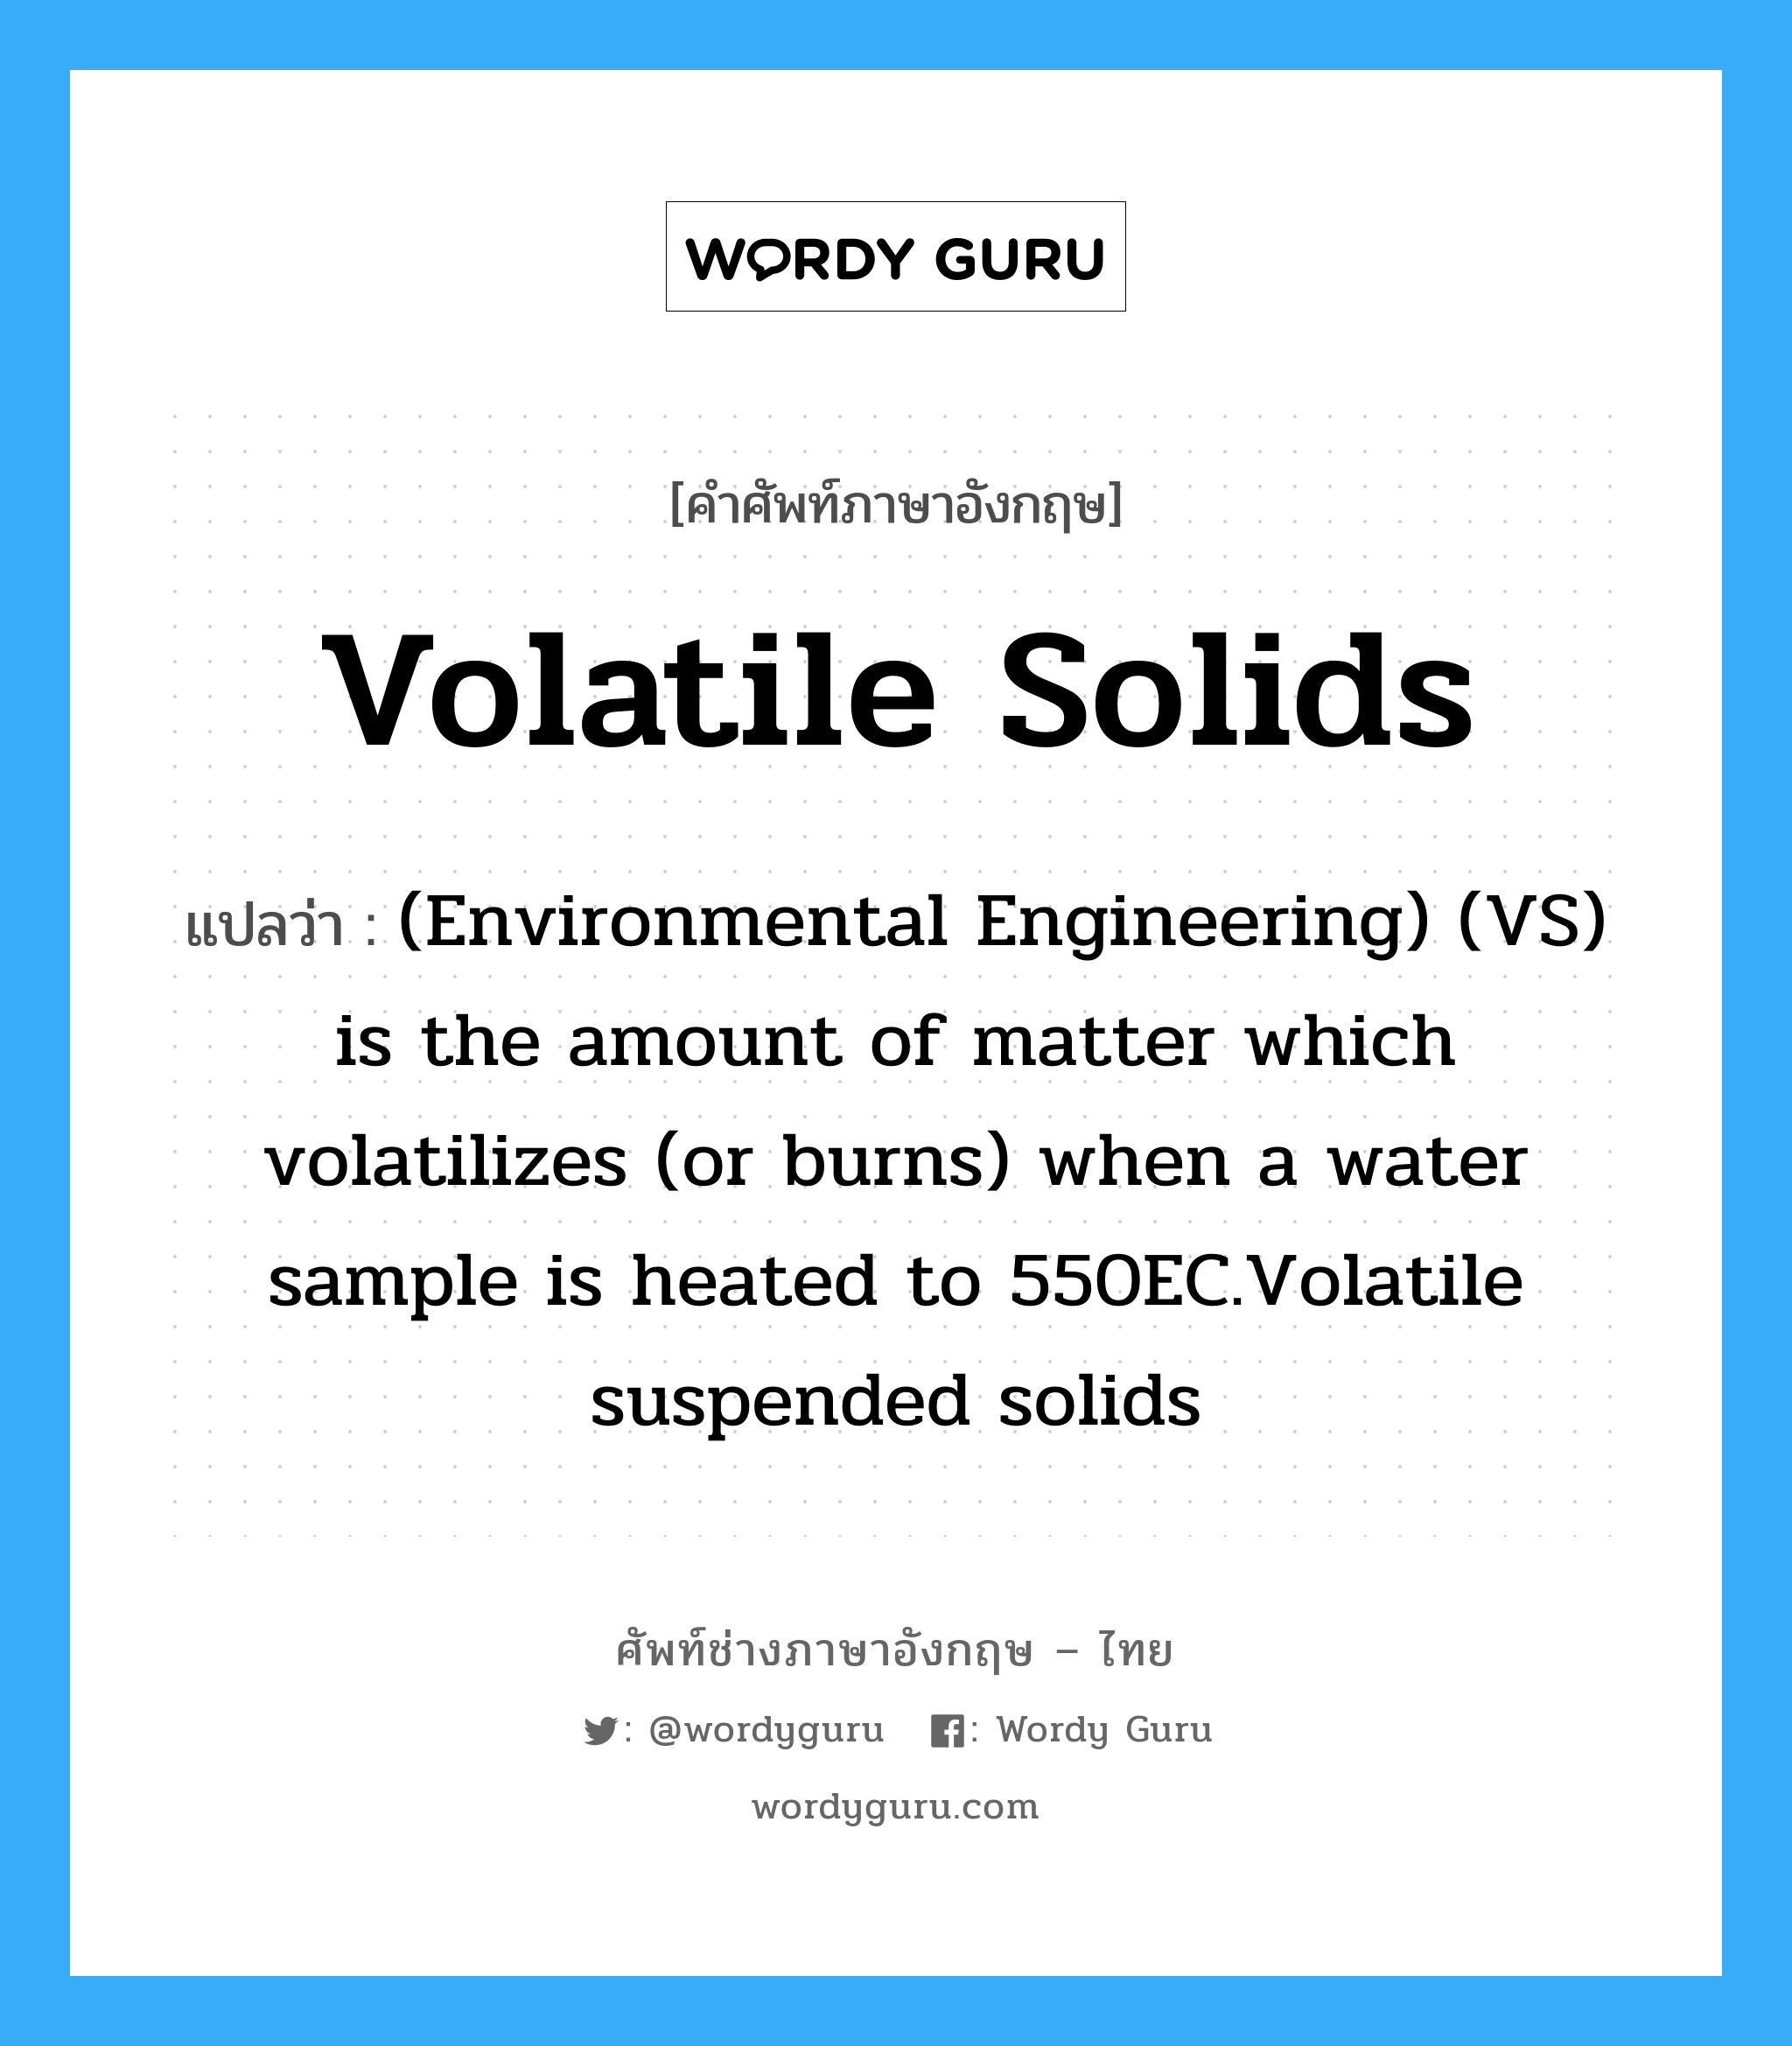 Volatile solids แปลว่า?, คำศัพท์ช่างภาษาอังกฤษ - ไทย Volatile solids คำศัพท์ภาษาอังกฤษ Volatile solids แปลว่า (Environmental Engineering) (VS) is the amount of matter which volatilizes (or burns) when a water sample is heated to 550EC.Volatile suspended solids